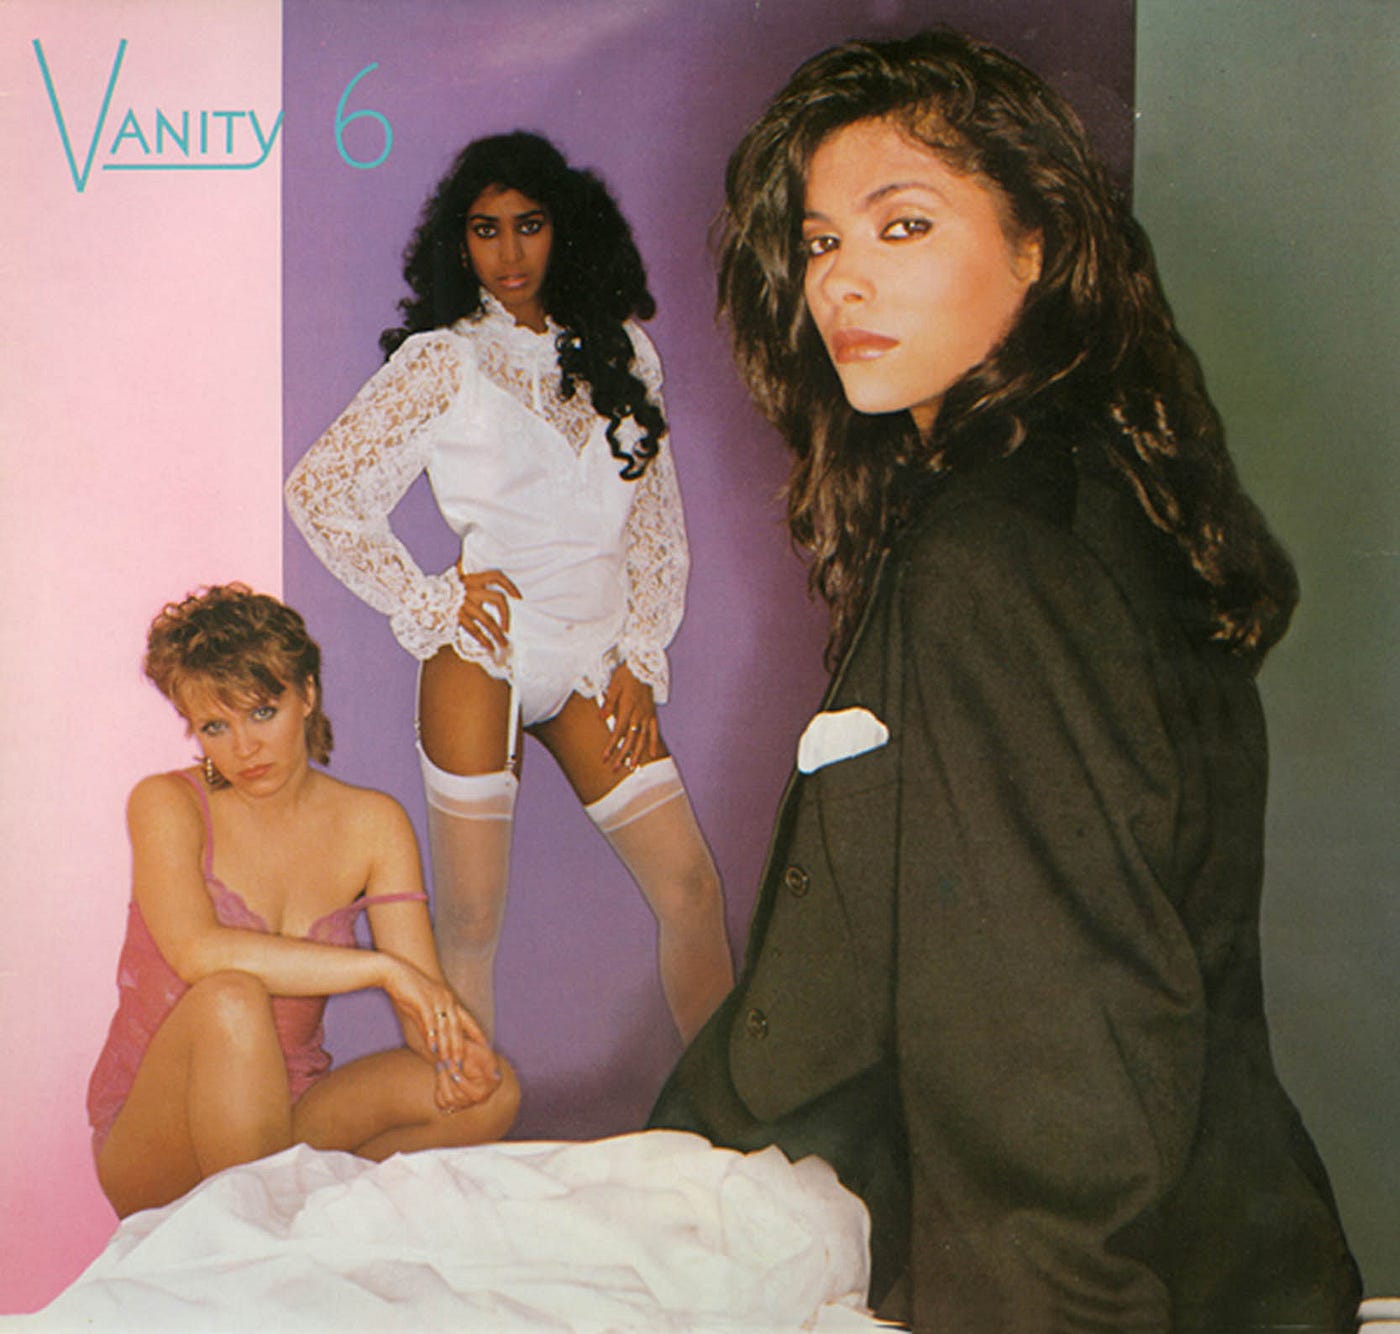 Prince's Vanity. As beautiful as the night sky, full of… | by Kim Camilia |  The Violet Reality